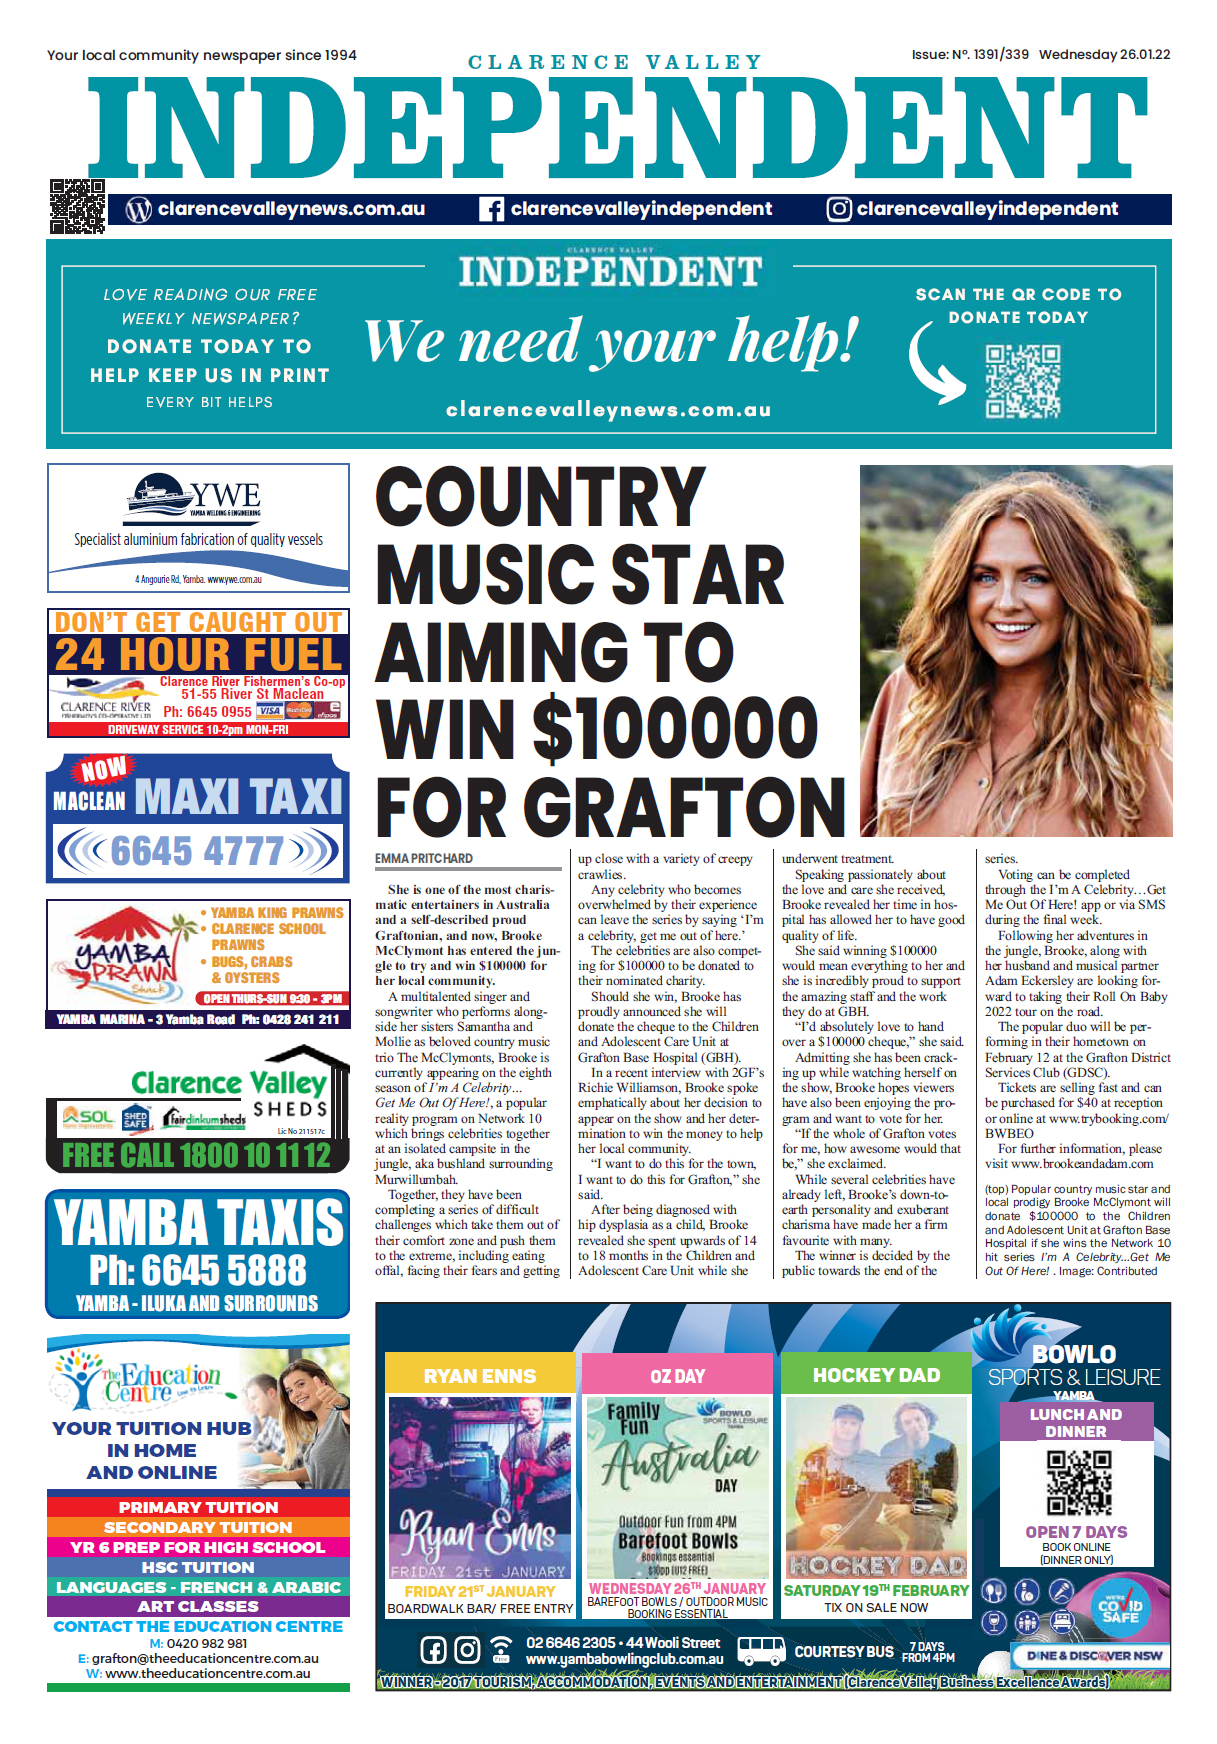 Clarence Valley Independent 26 January 2022